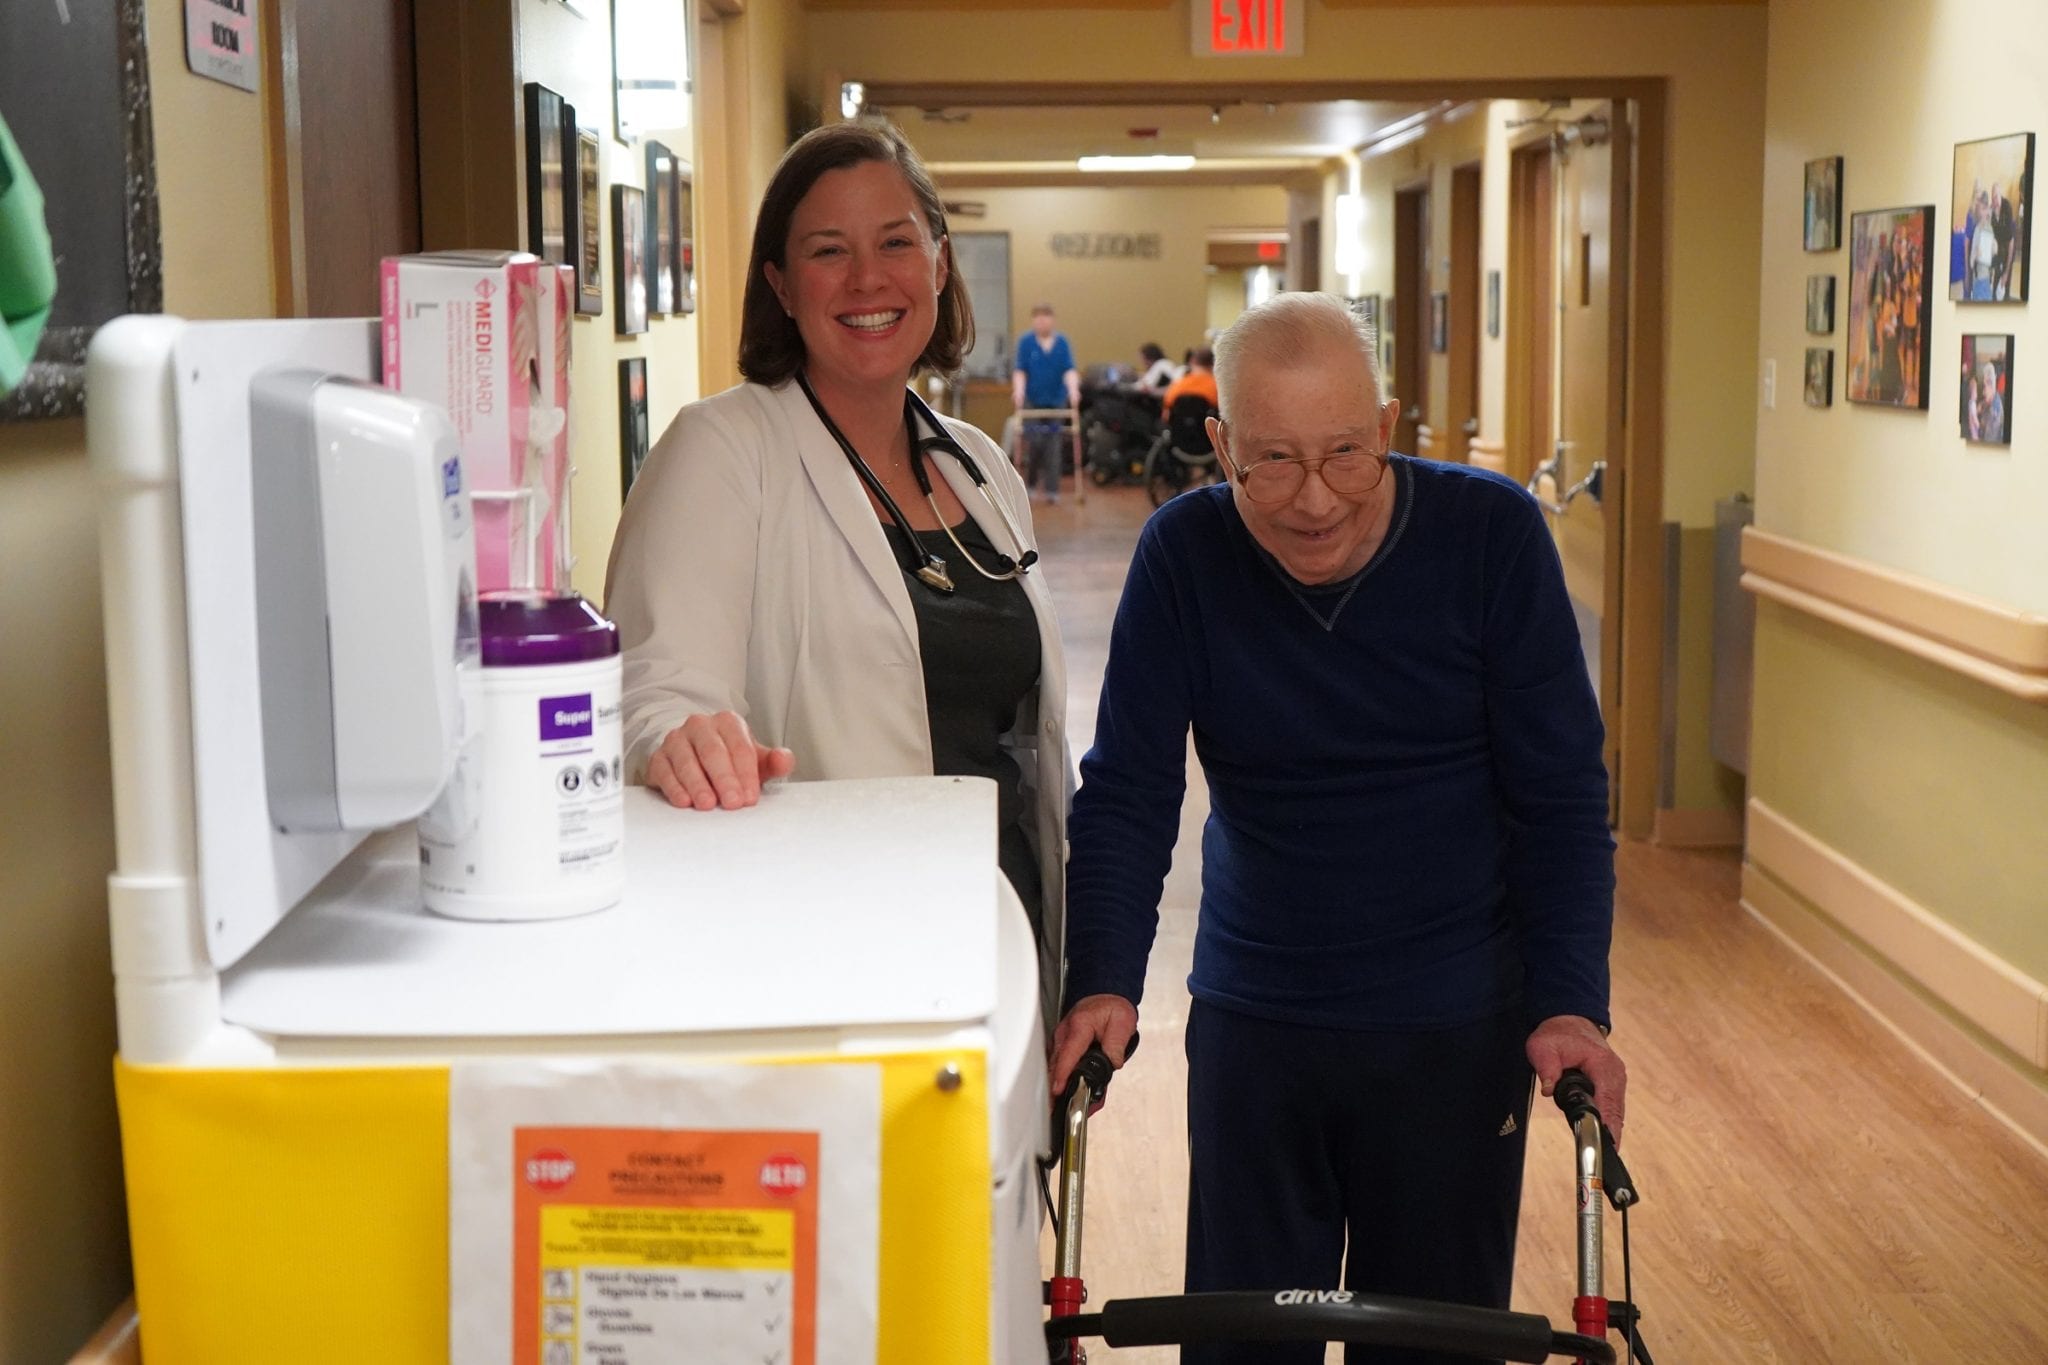 A mature male resident smiles and standing next to a smiling female healthcare worker in a corridor.